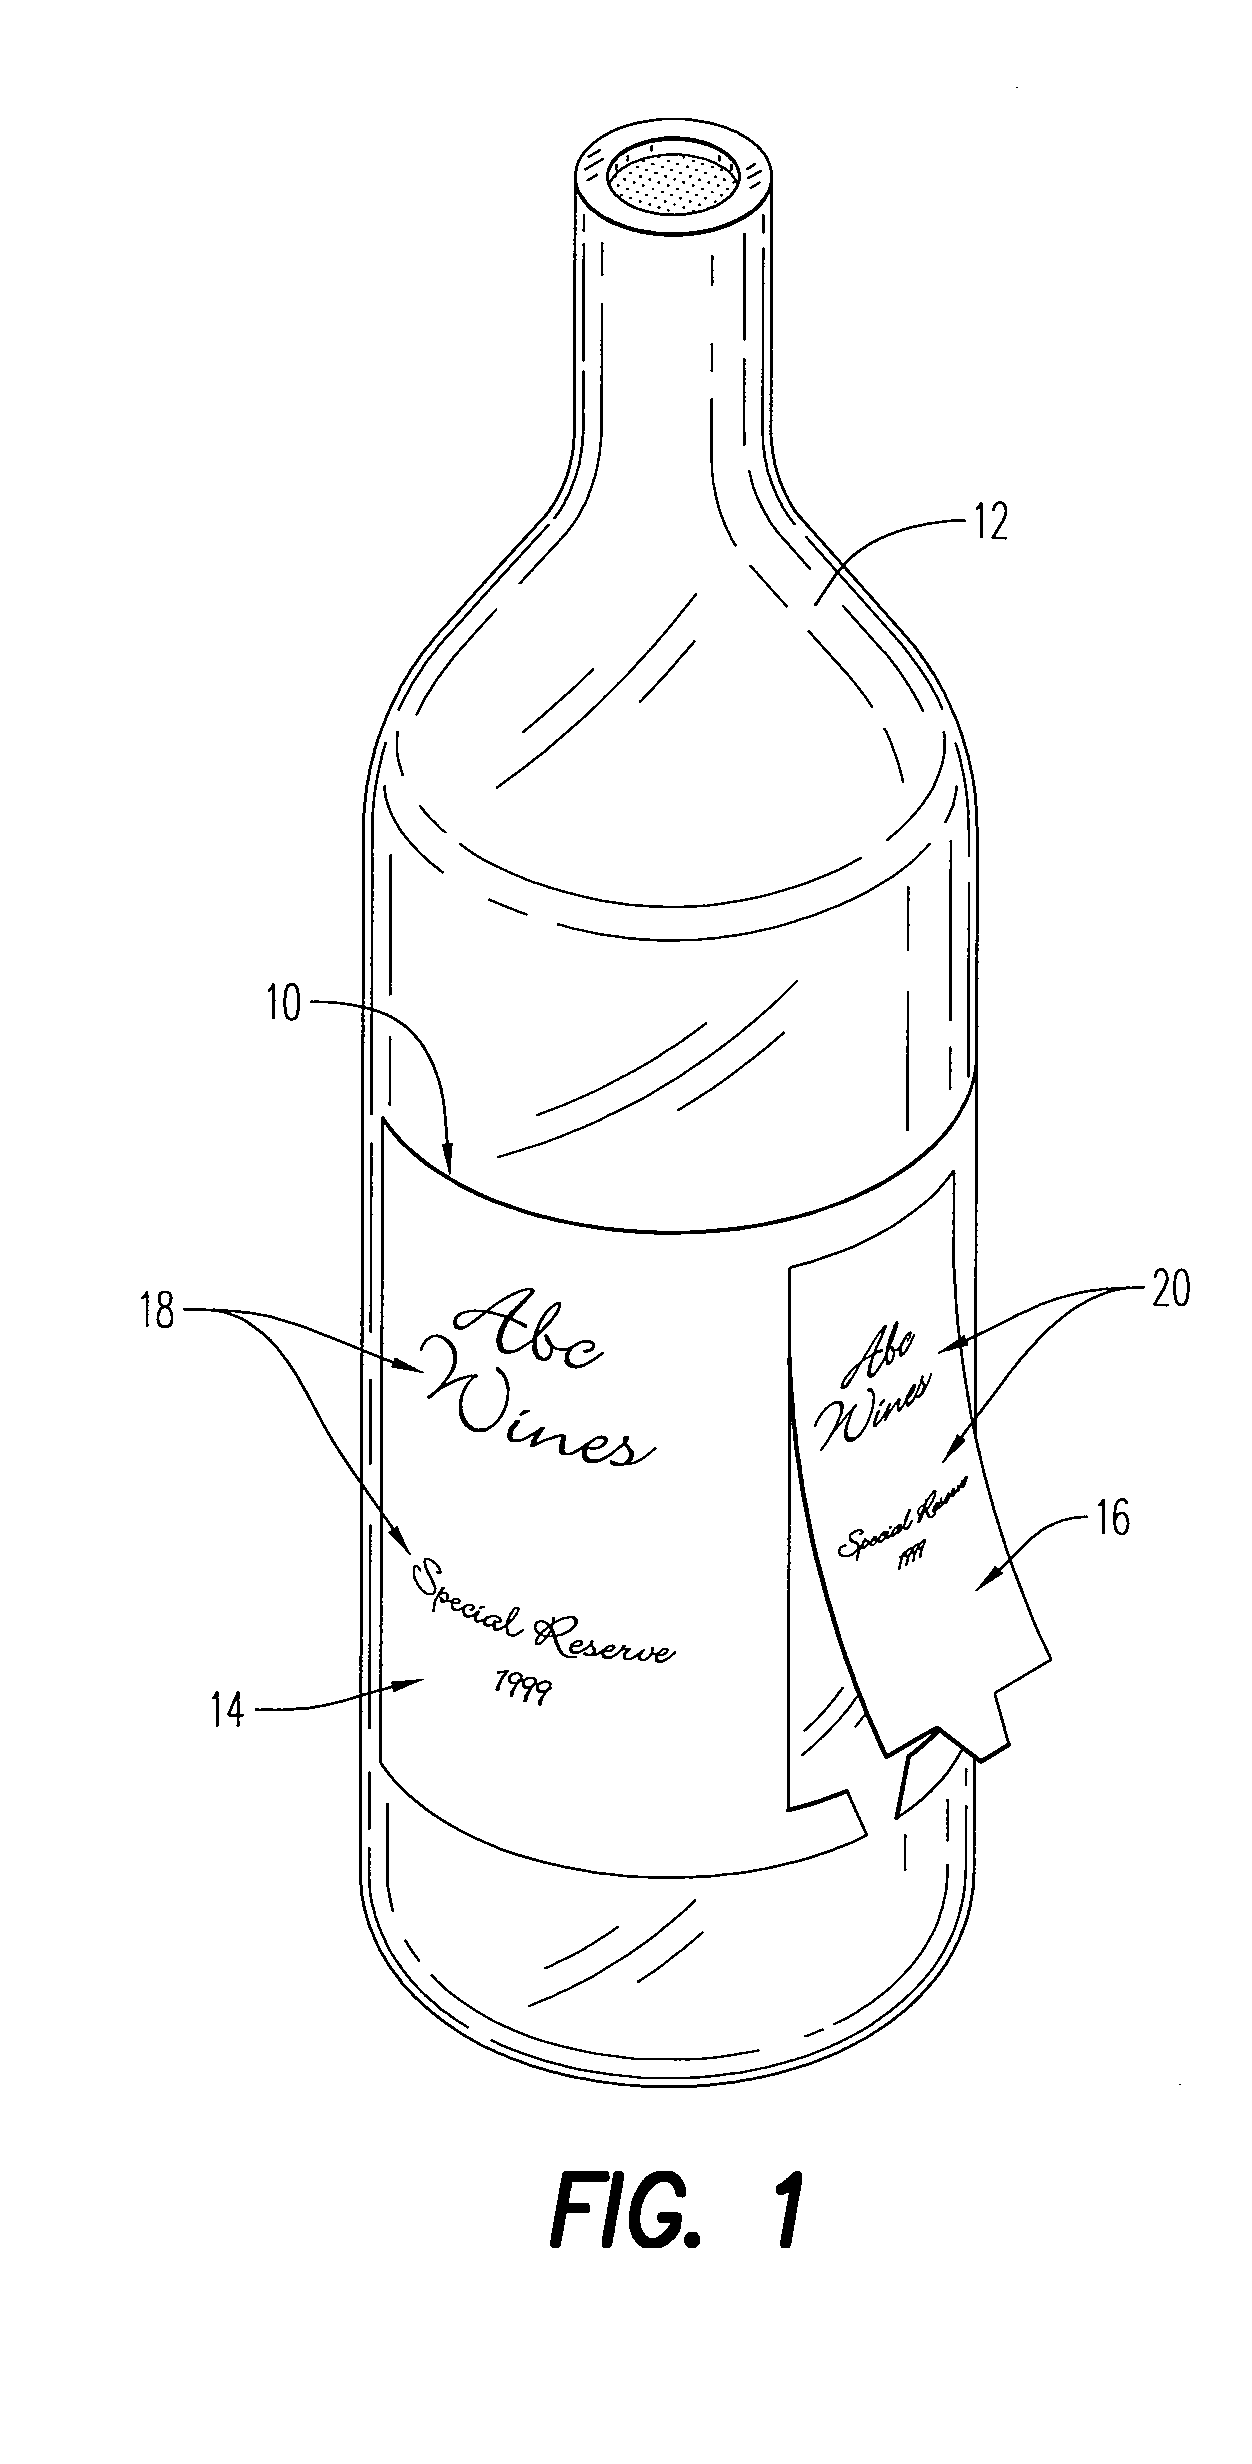 Product labels having removable portions having adhesive and backing thereon